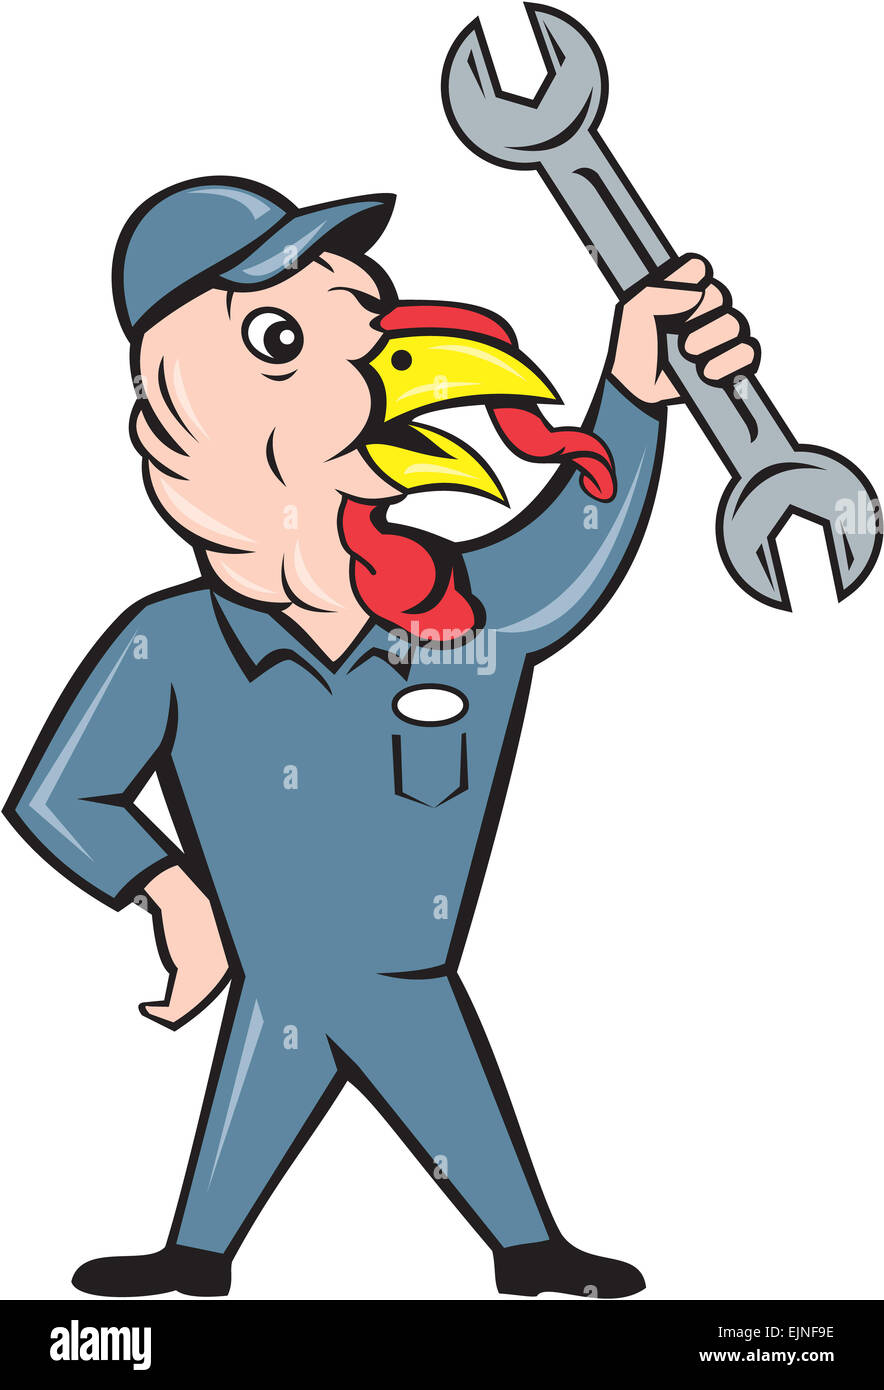 Illustration of a wild turkey mechanic standing holding clutching spanner looking to the side set done in cartoon style on isolated white background. Stock Photo